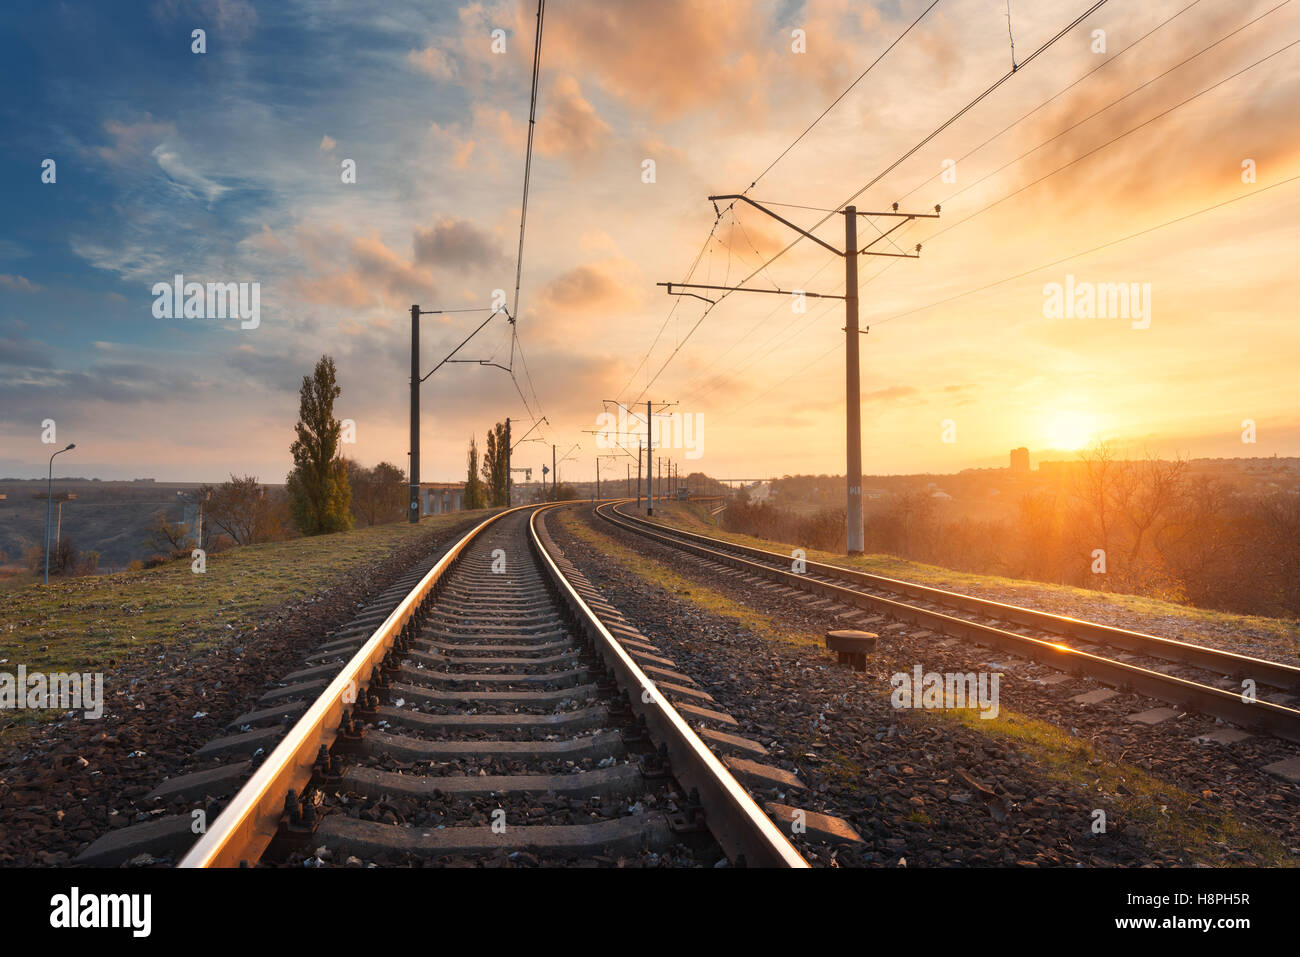 Railroad against beautiful sky at sunset. Industrial landscape with railway station, colorful blue sky with clouds, trees and gr Stock Photo